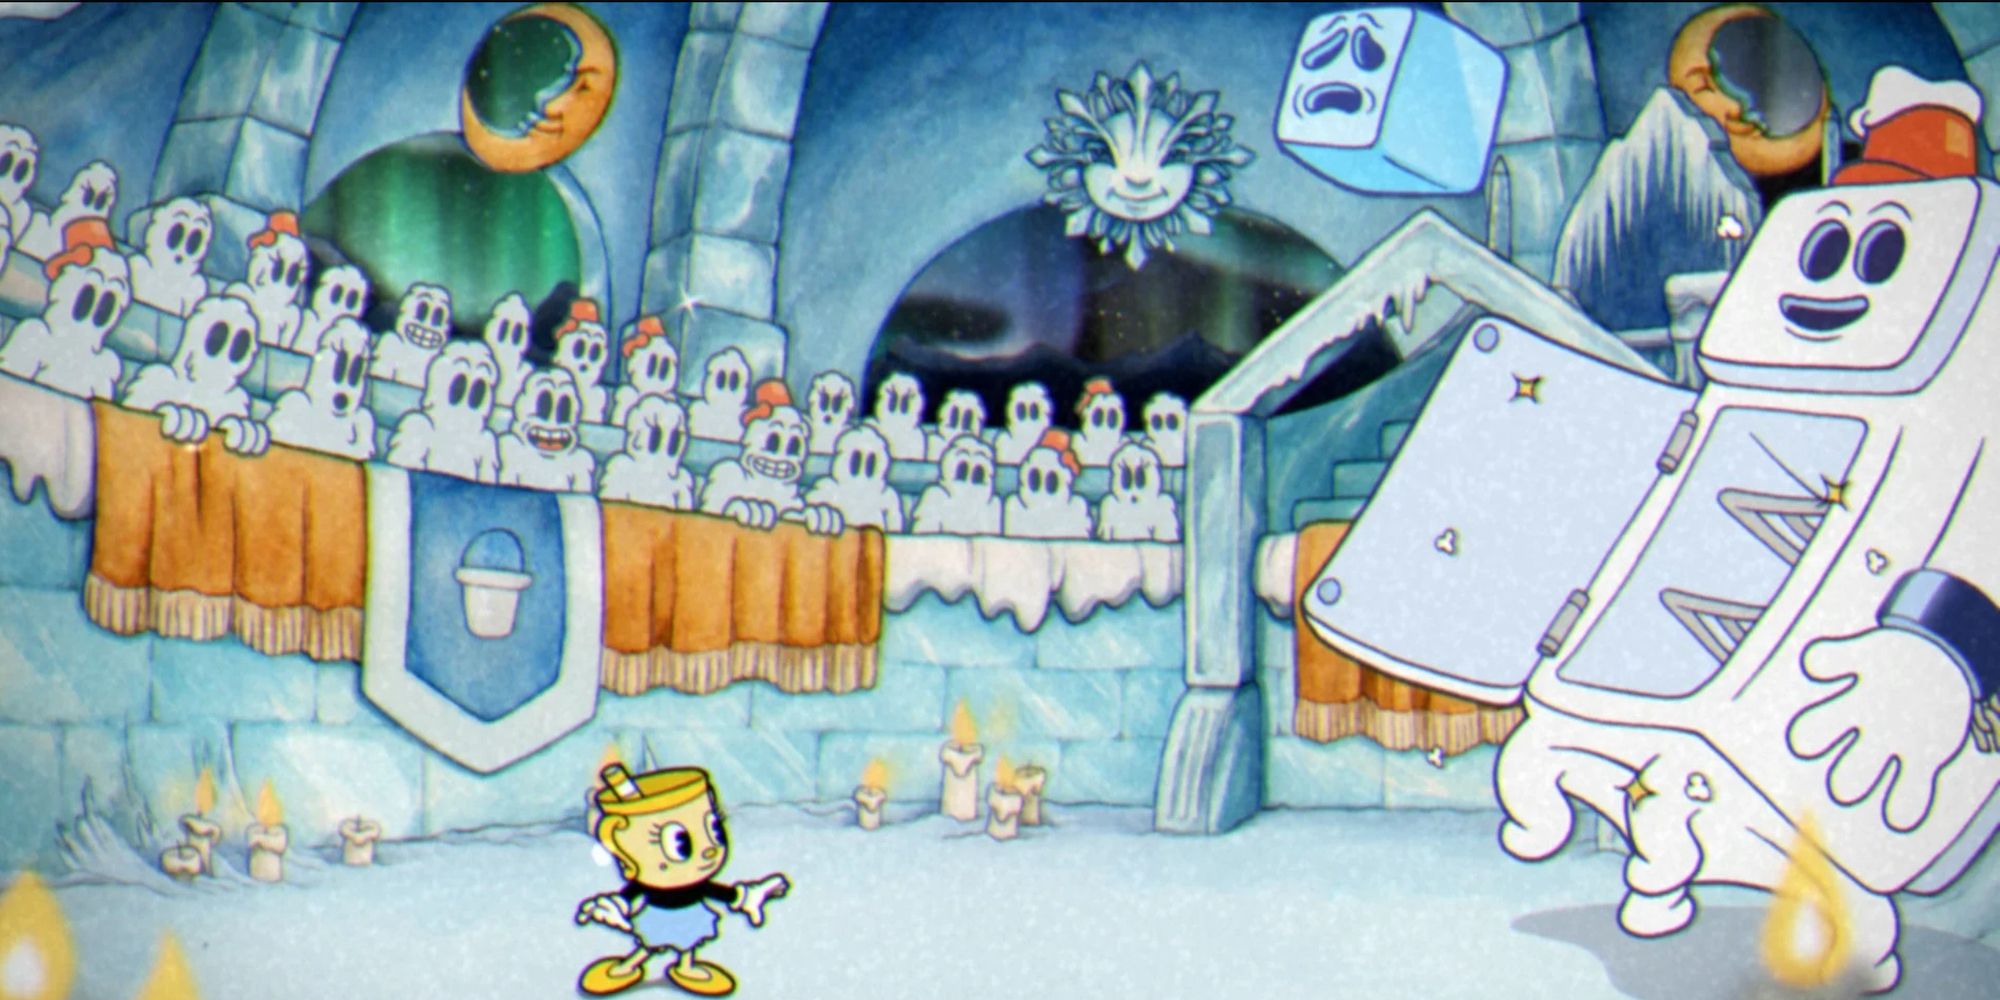 Mortimer Freeze Second Phase Boss Fight Cuphead Delicious Last Course